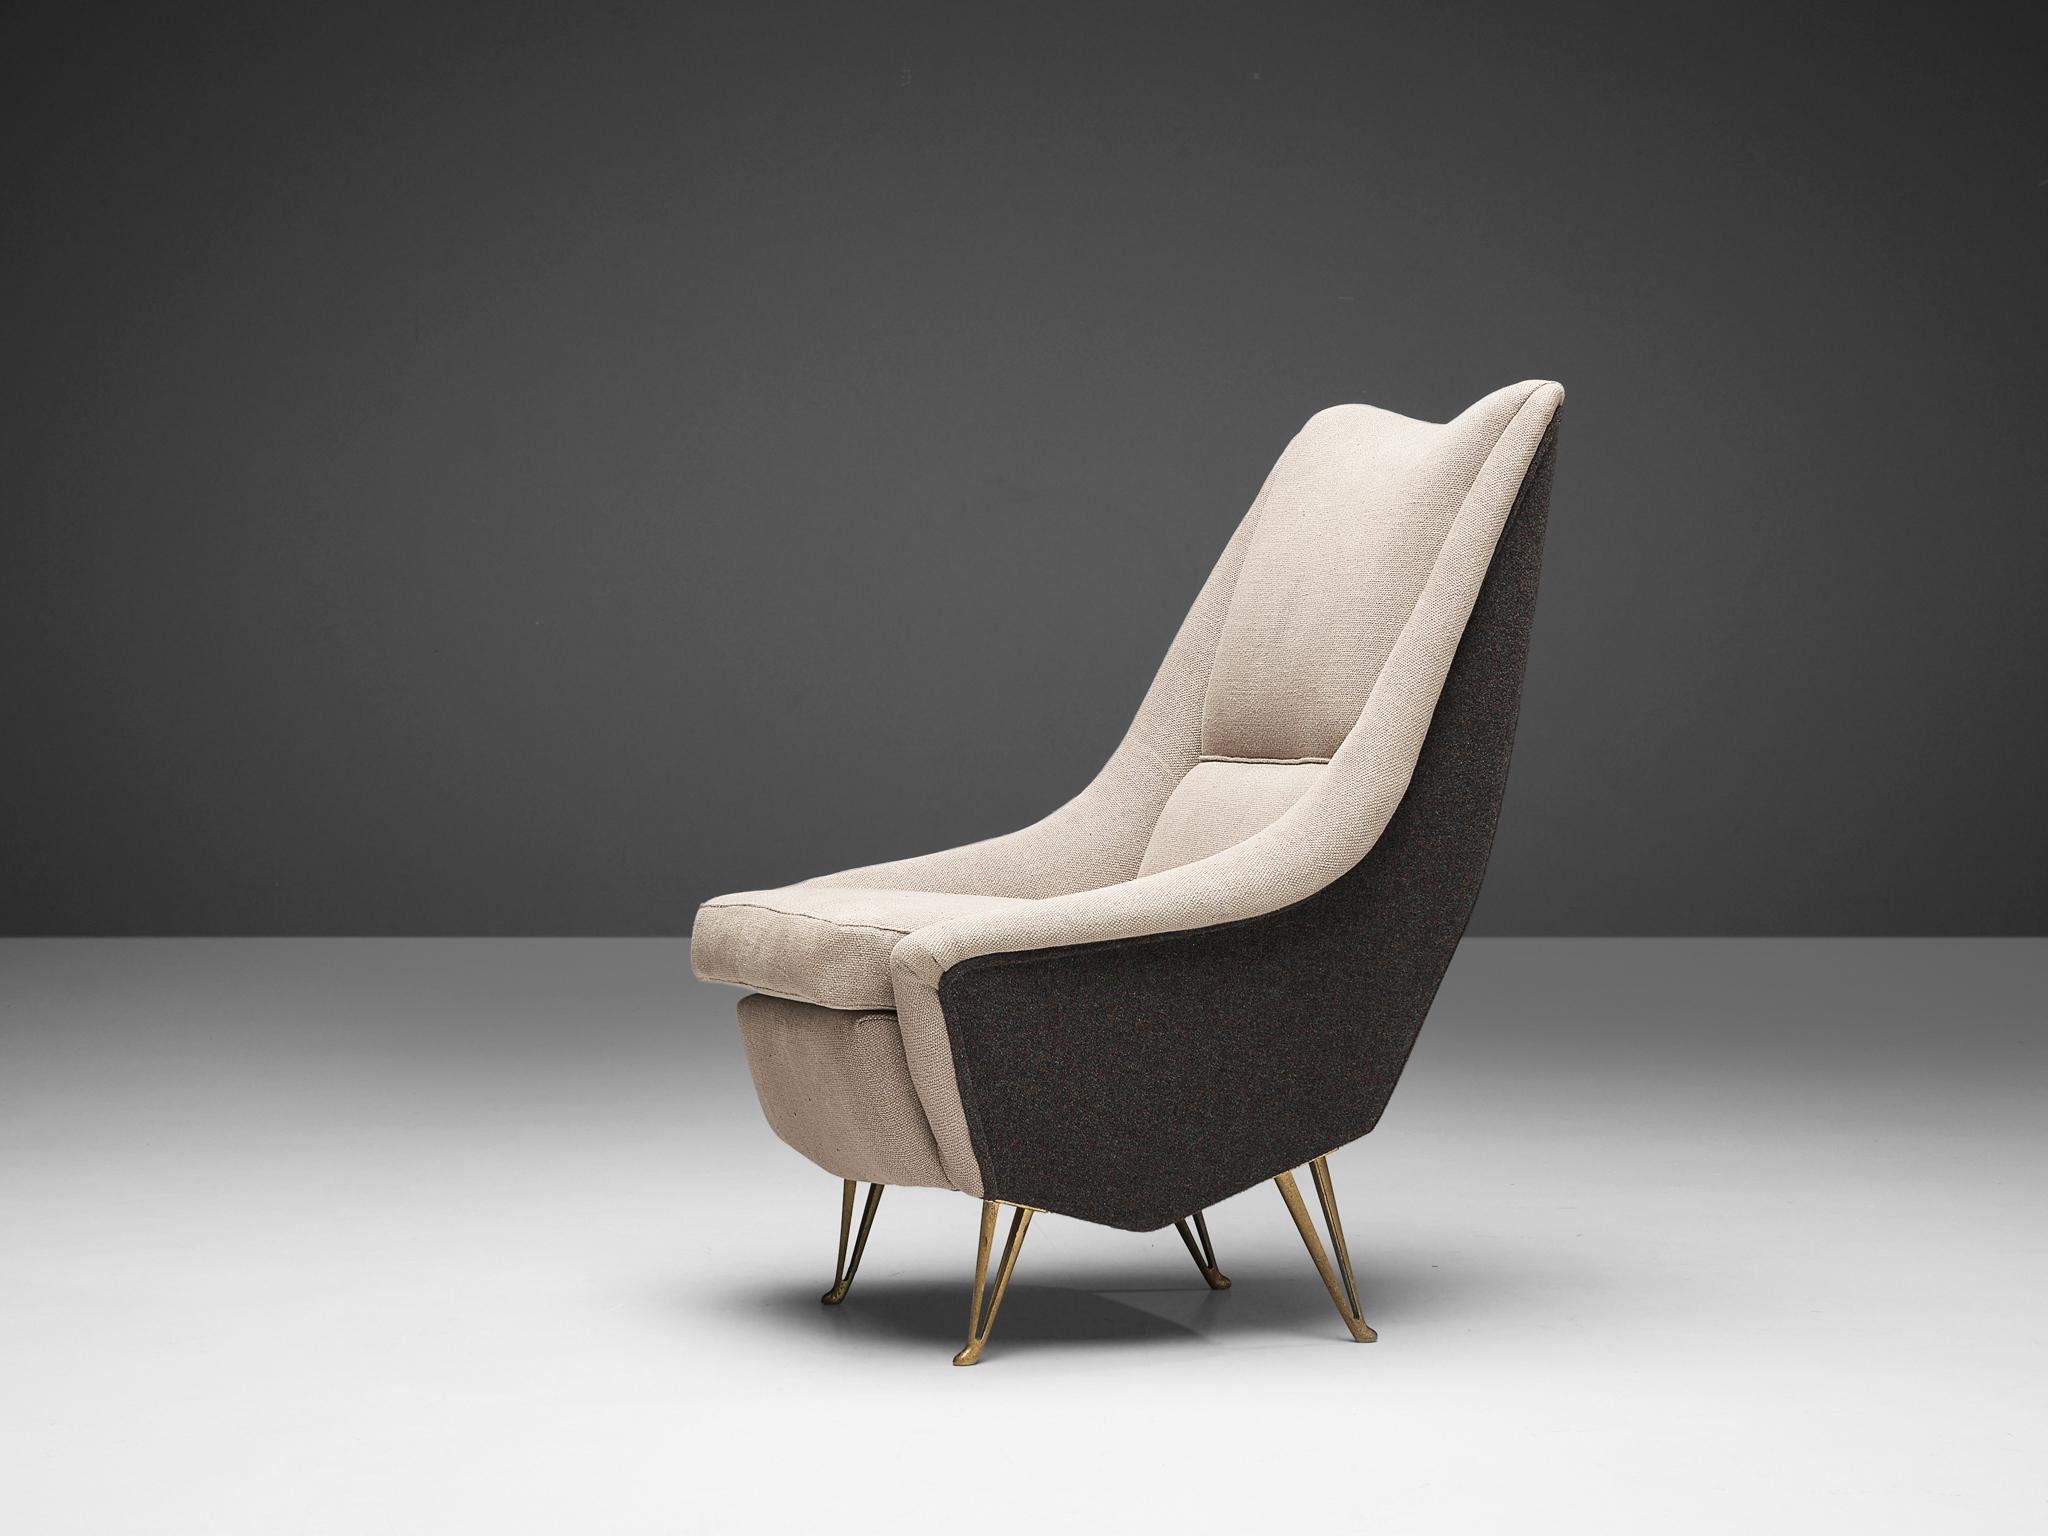 Lounge chair for ISA Bergamo, brass, fabric, Italian, 1960s

Graceful Italian lounge chair with highback. This lounge chair is beautiful to look at due to its interesting chair. This gorgeous shape is highlighted by the bicolor upholstery. The